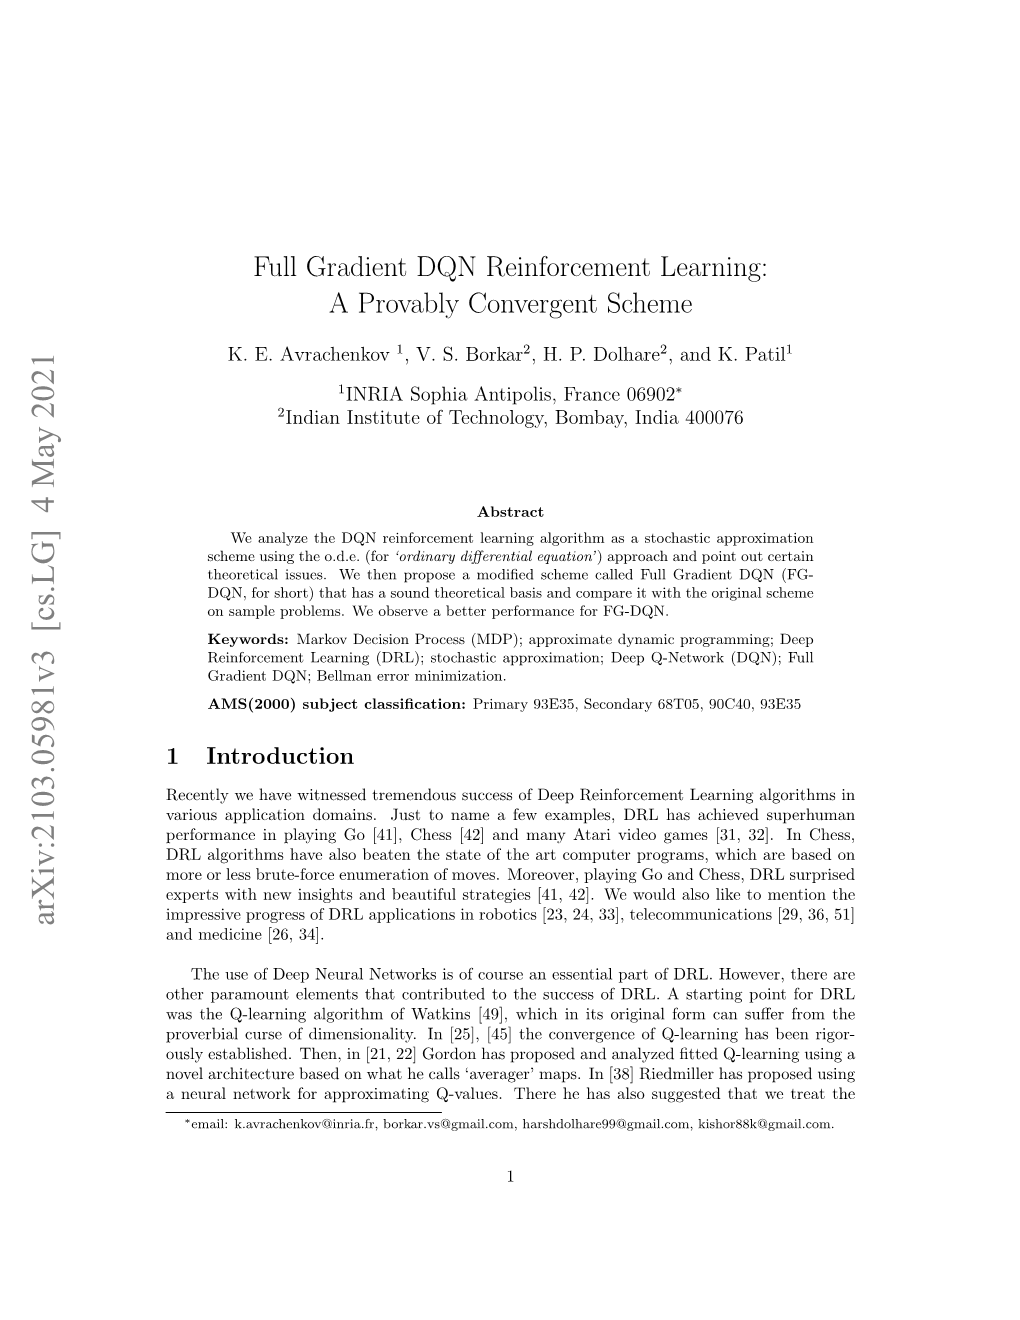 Full Gradient DQN Reinforcement Learning: a Provably Convergent Scheme